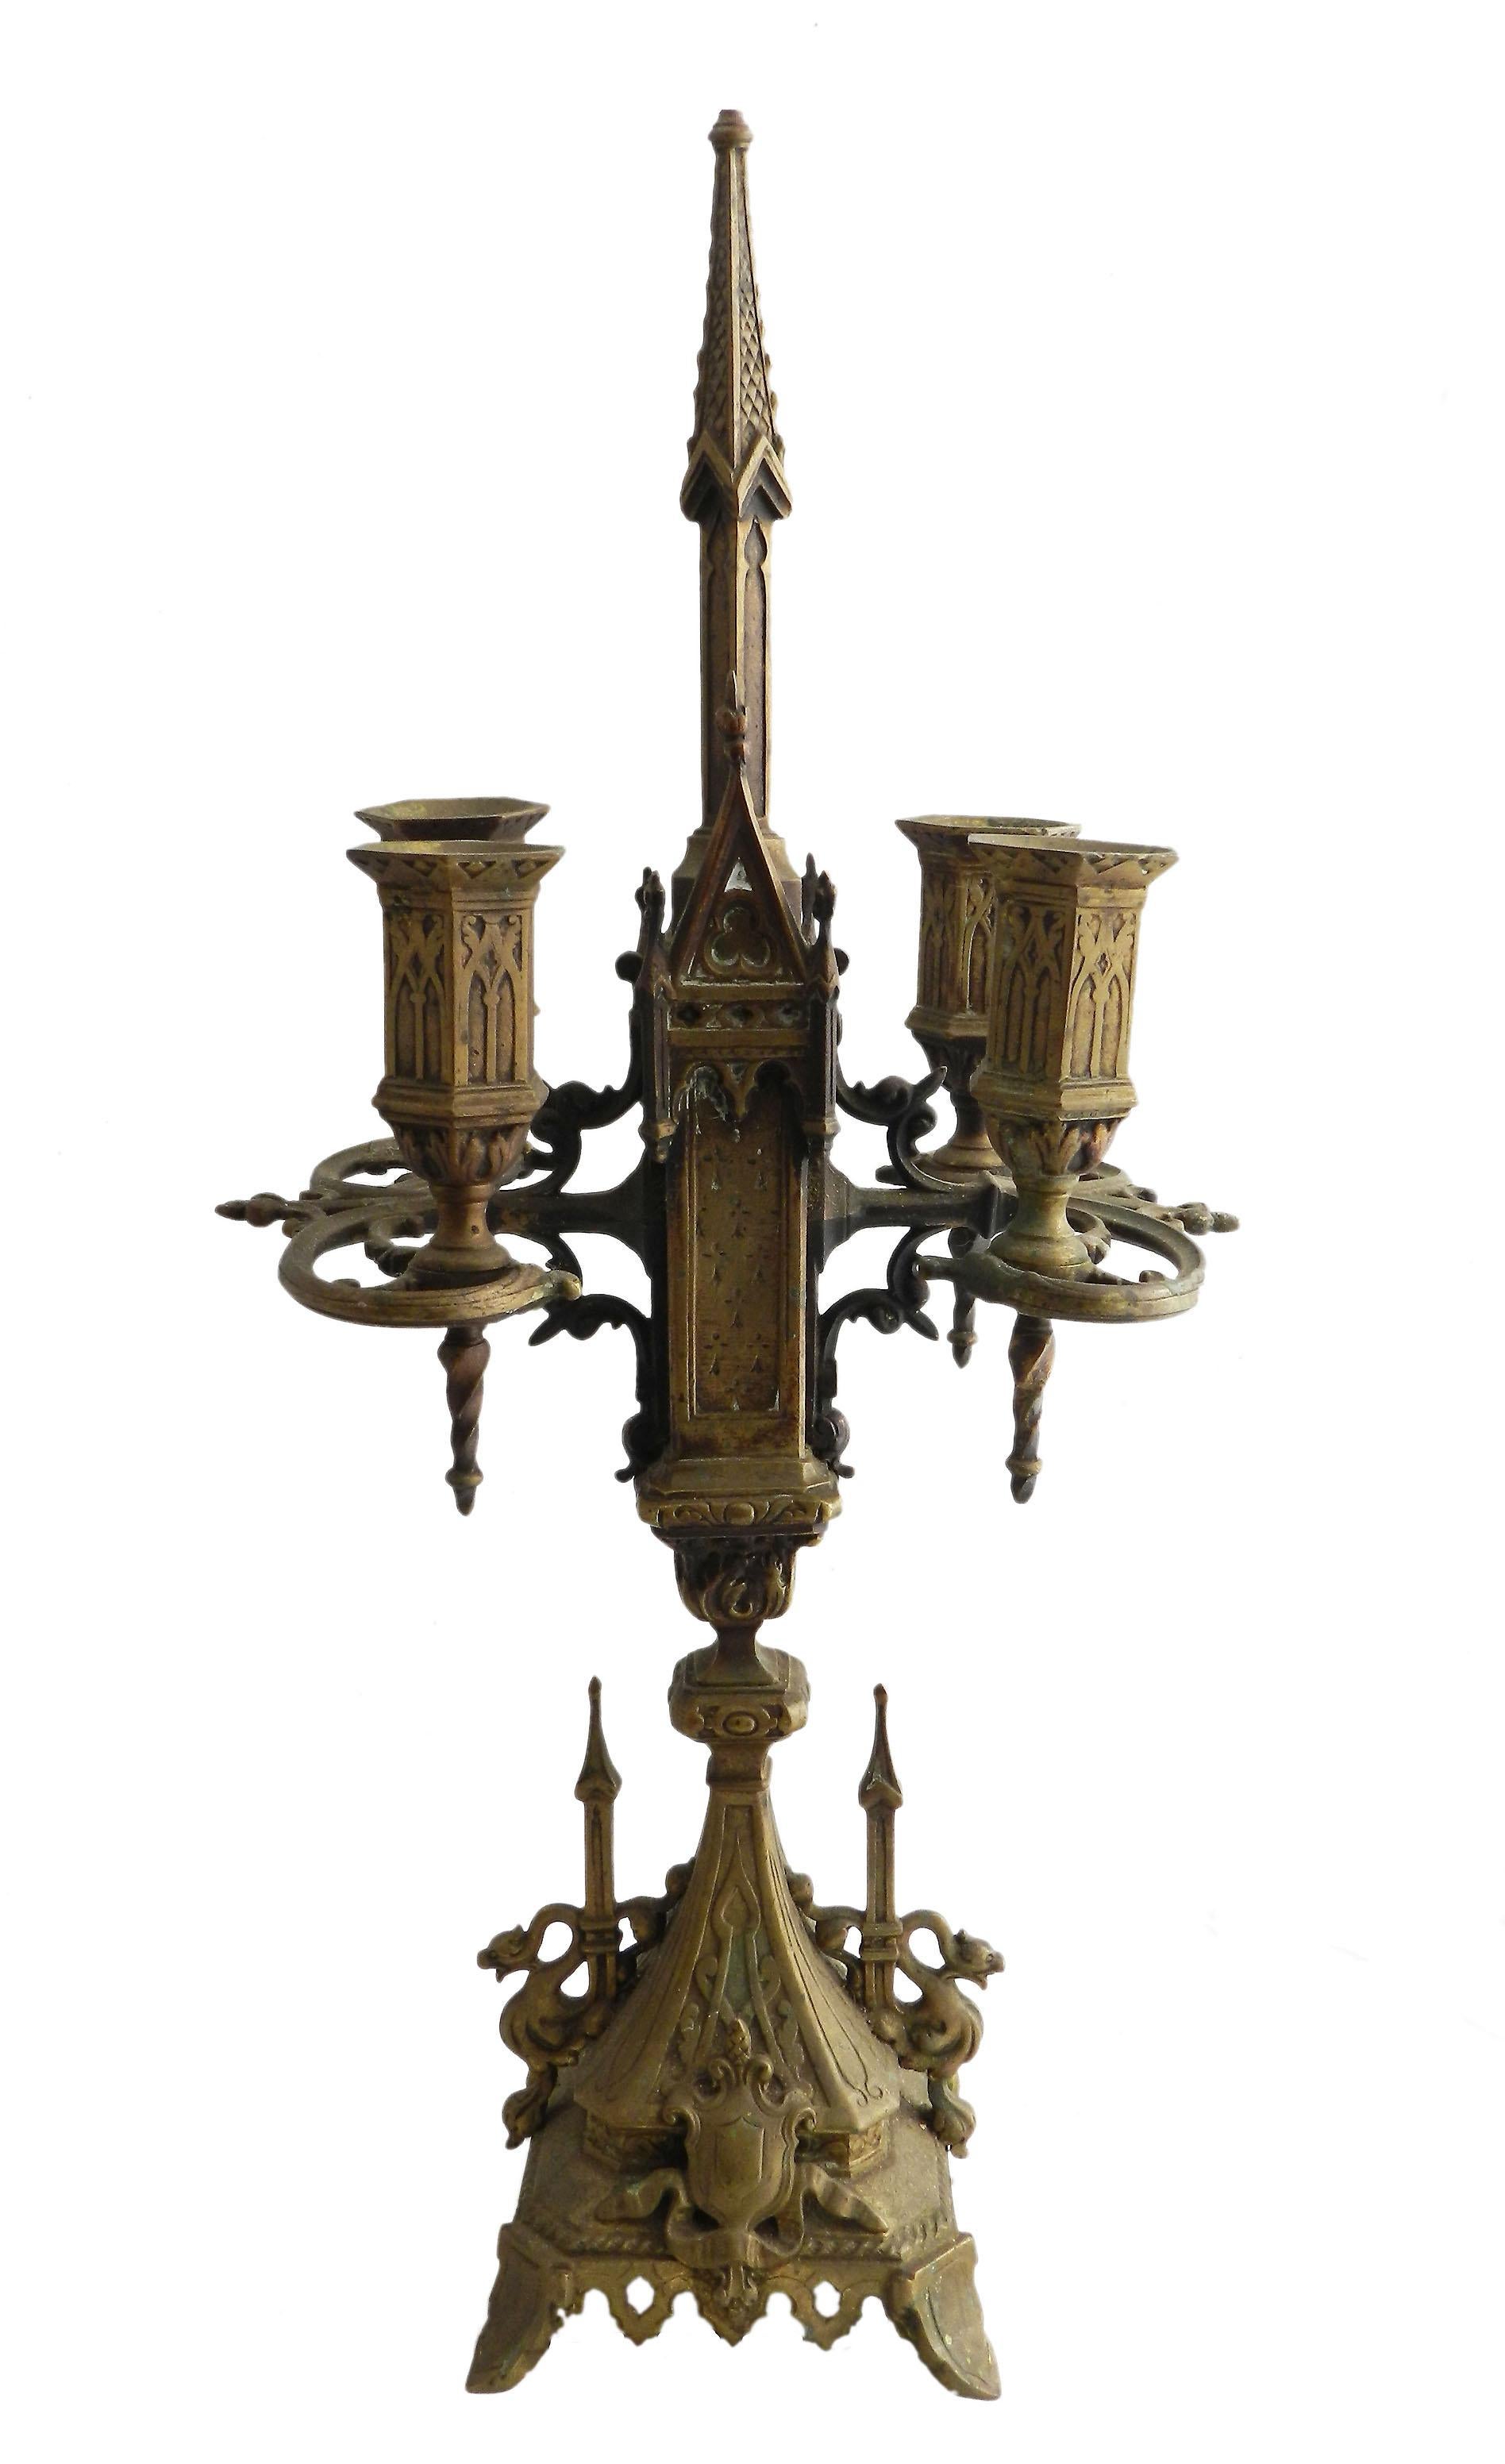 Gothic bronze candlestick, 19th century, French
Four candle
Good antique condition with some signs of use and age, hard to notice tiny impossible to notice small loss to top,
this will easily clean up we leave it as is for choice.





   